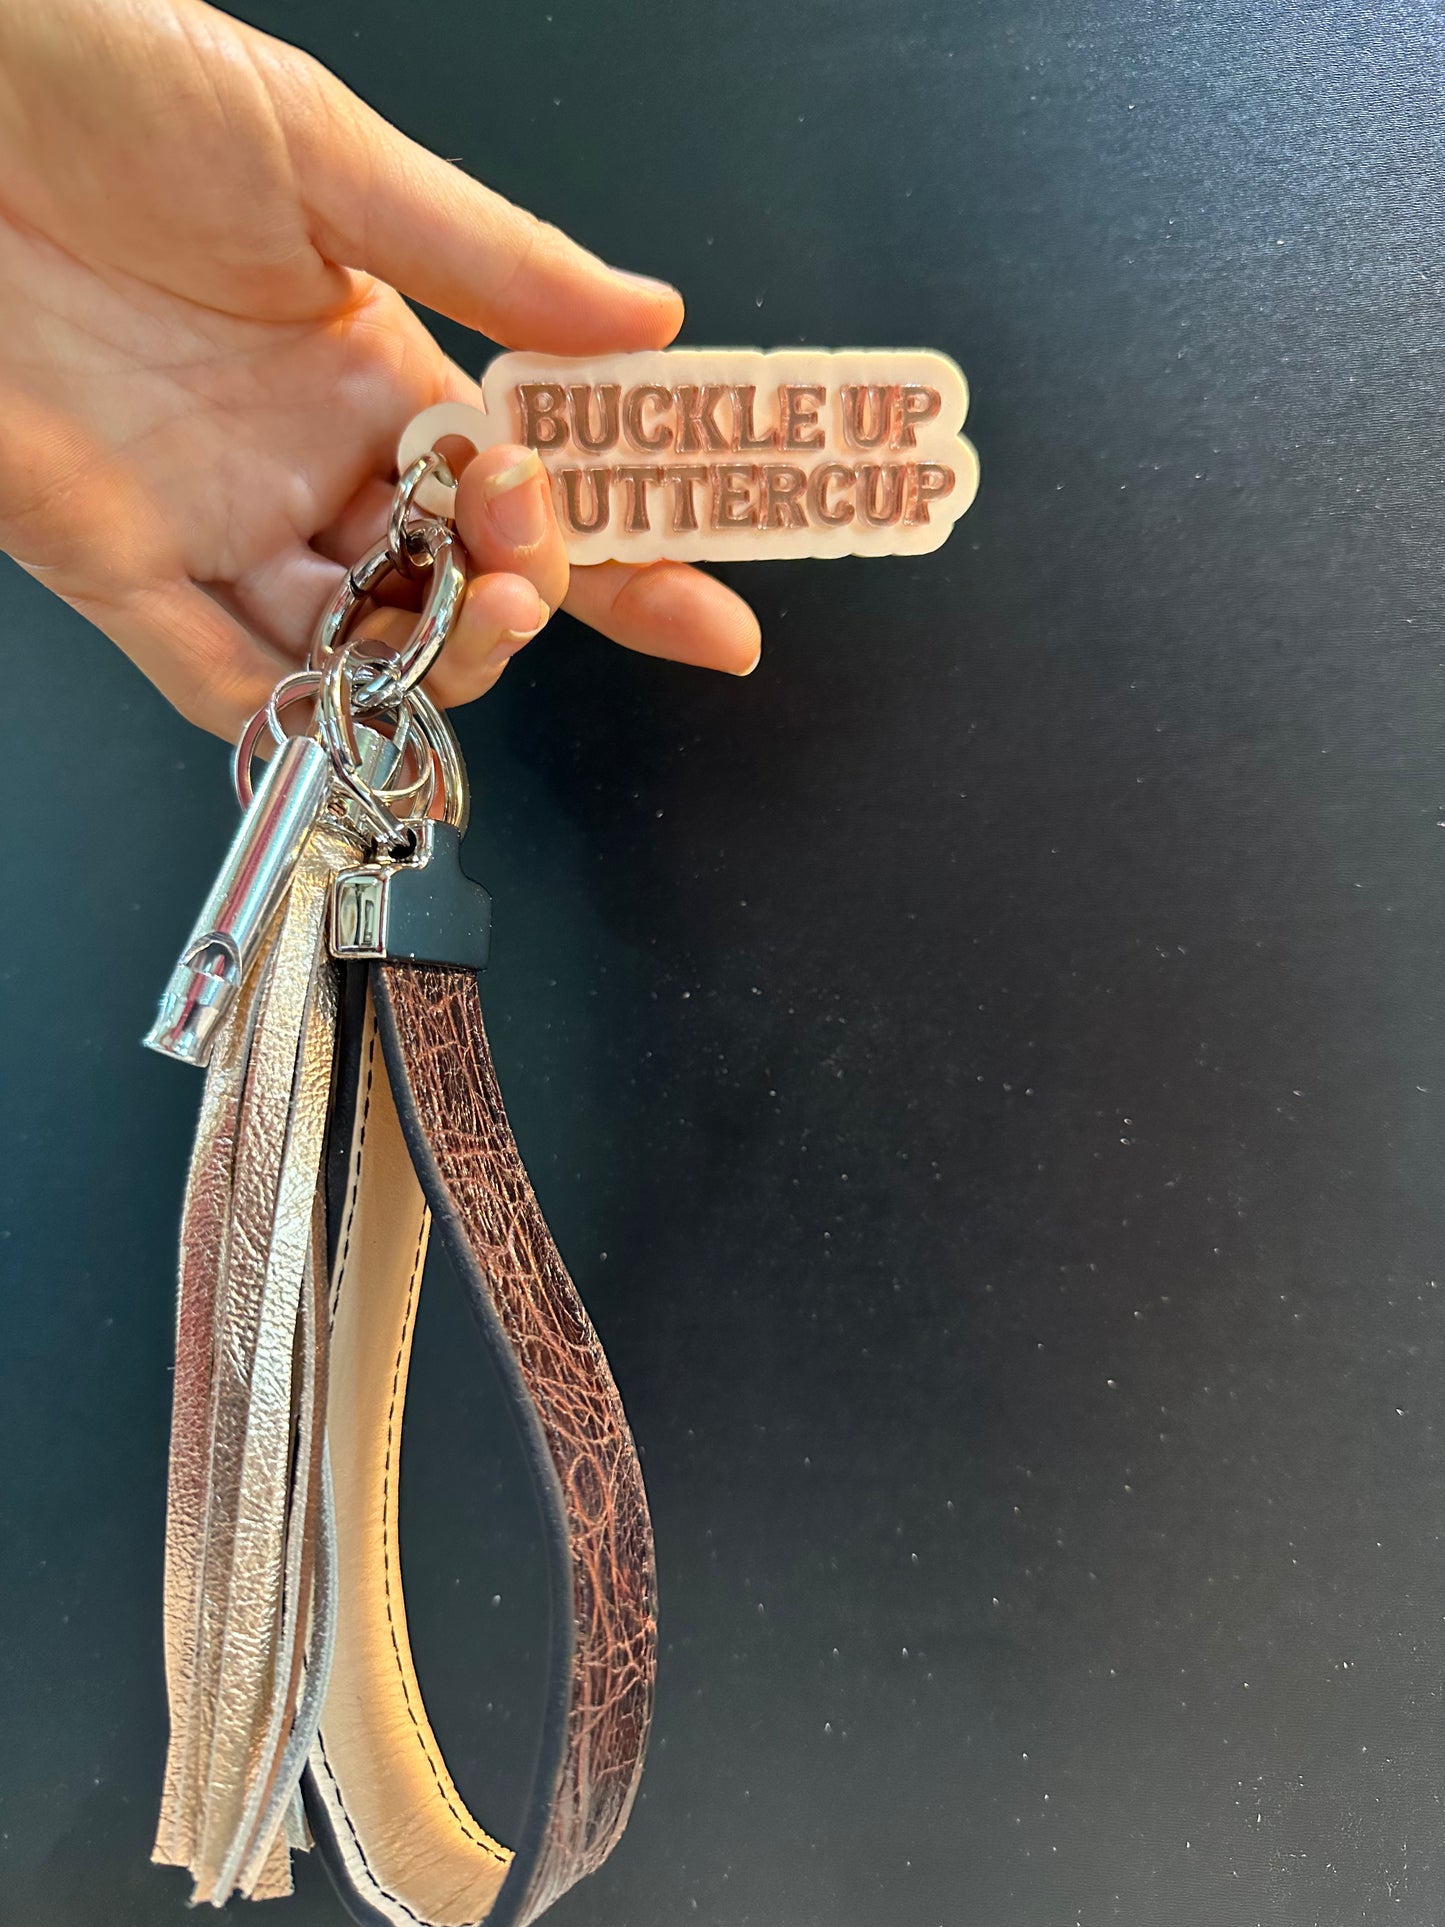 Buckle up buttercup self defense keychain